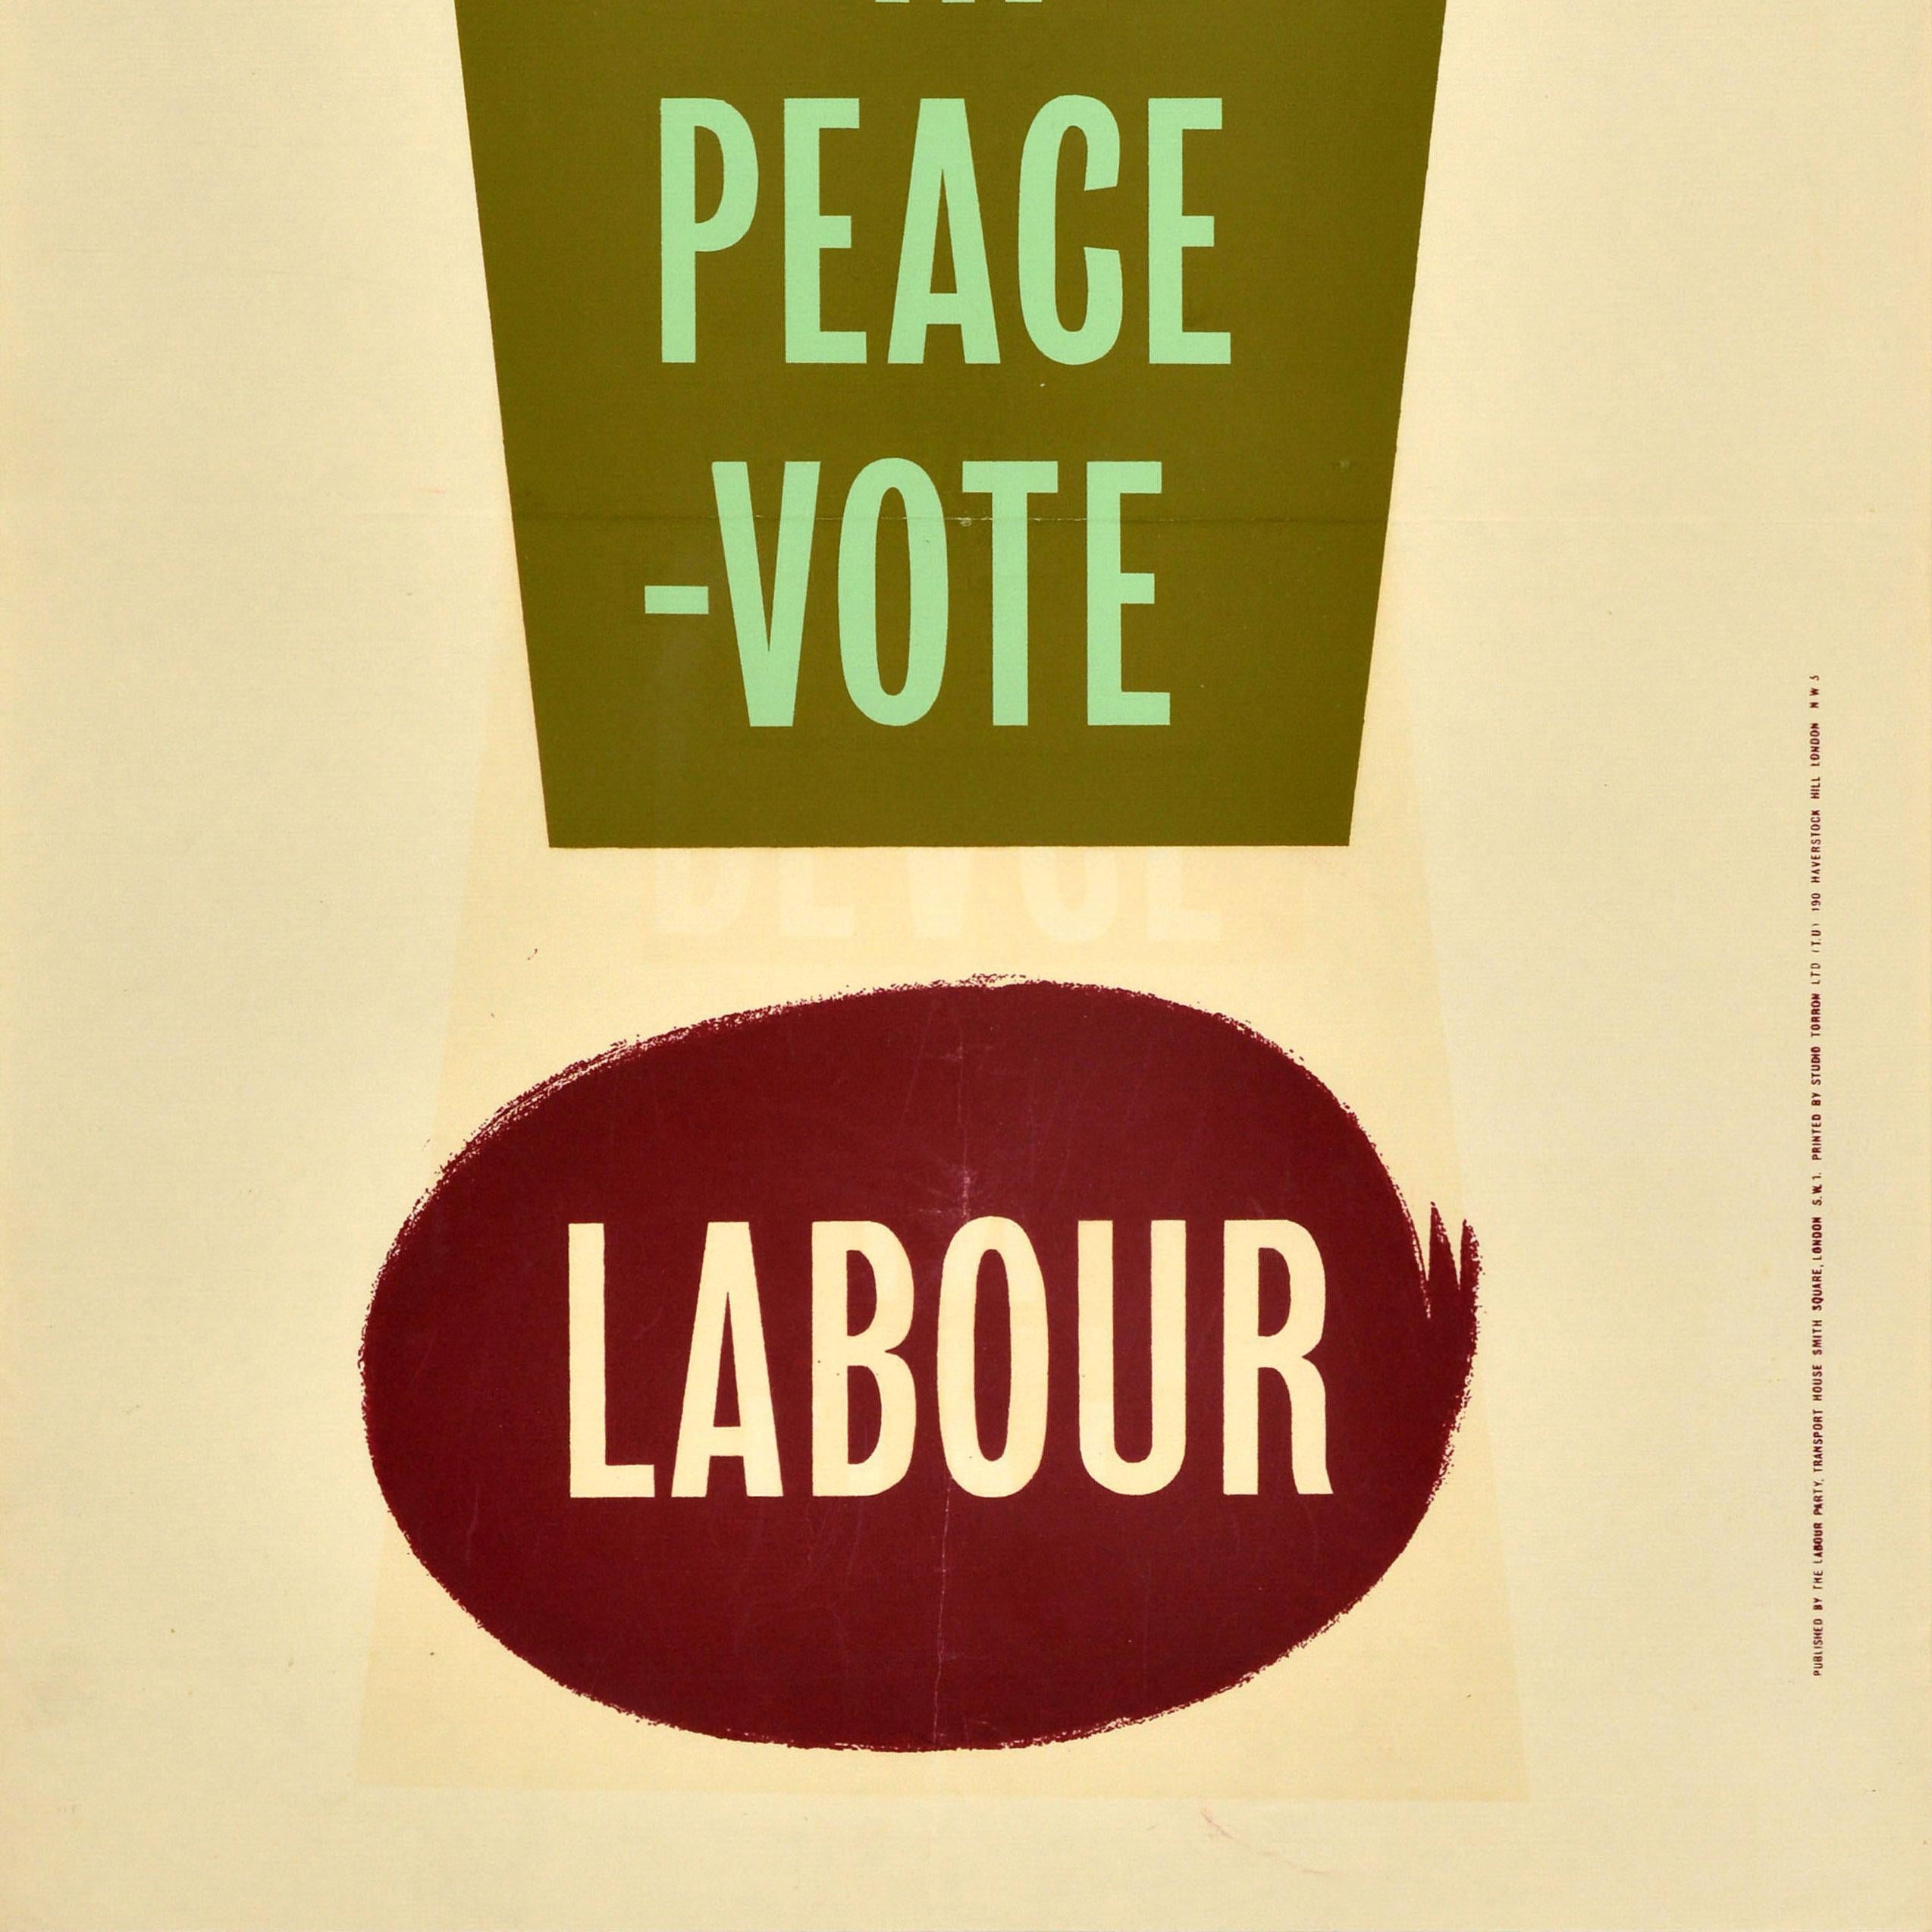 Original vintage political General Election poster issued by the Labour Party - Live in Peace Vote Labour - featuring a dynamic design with the bold text inside an exclamation mark. Printed by Studio Torrow Ltd. Good condition, folds, creasing,